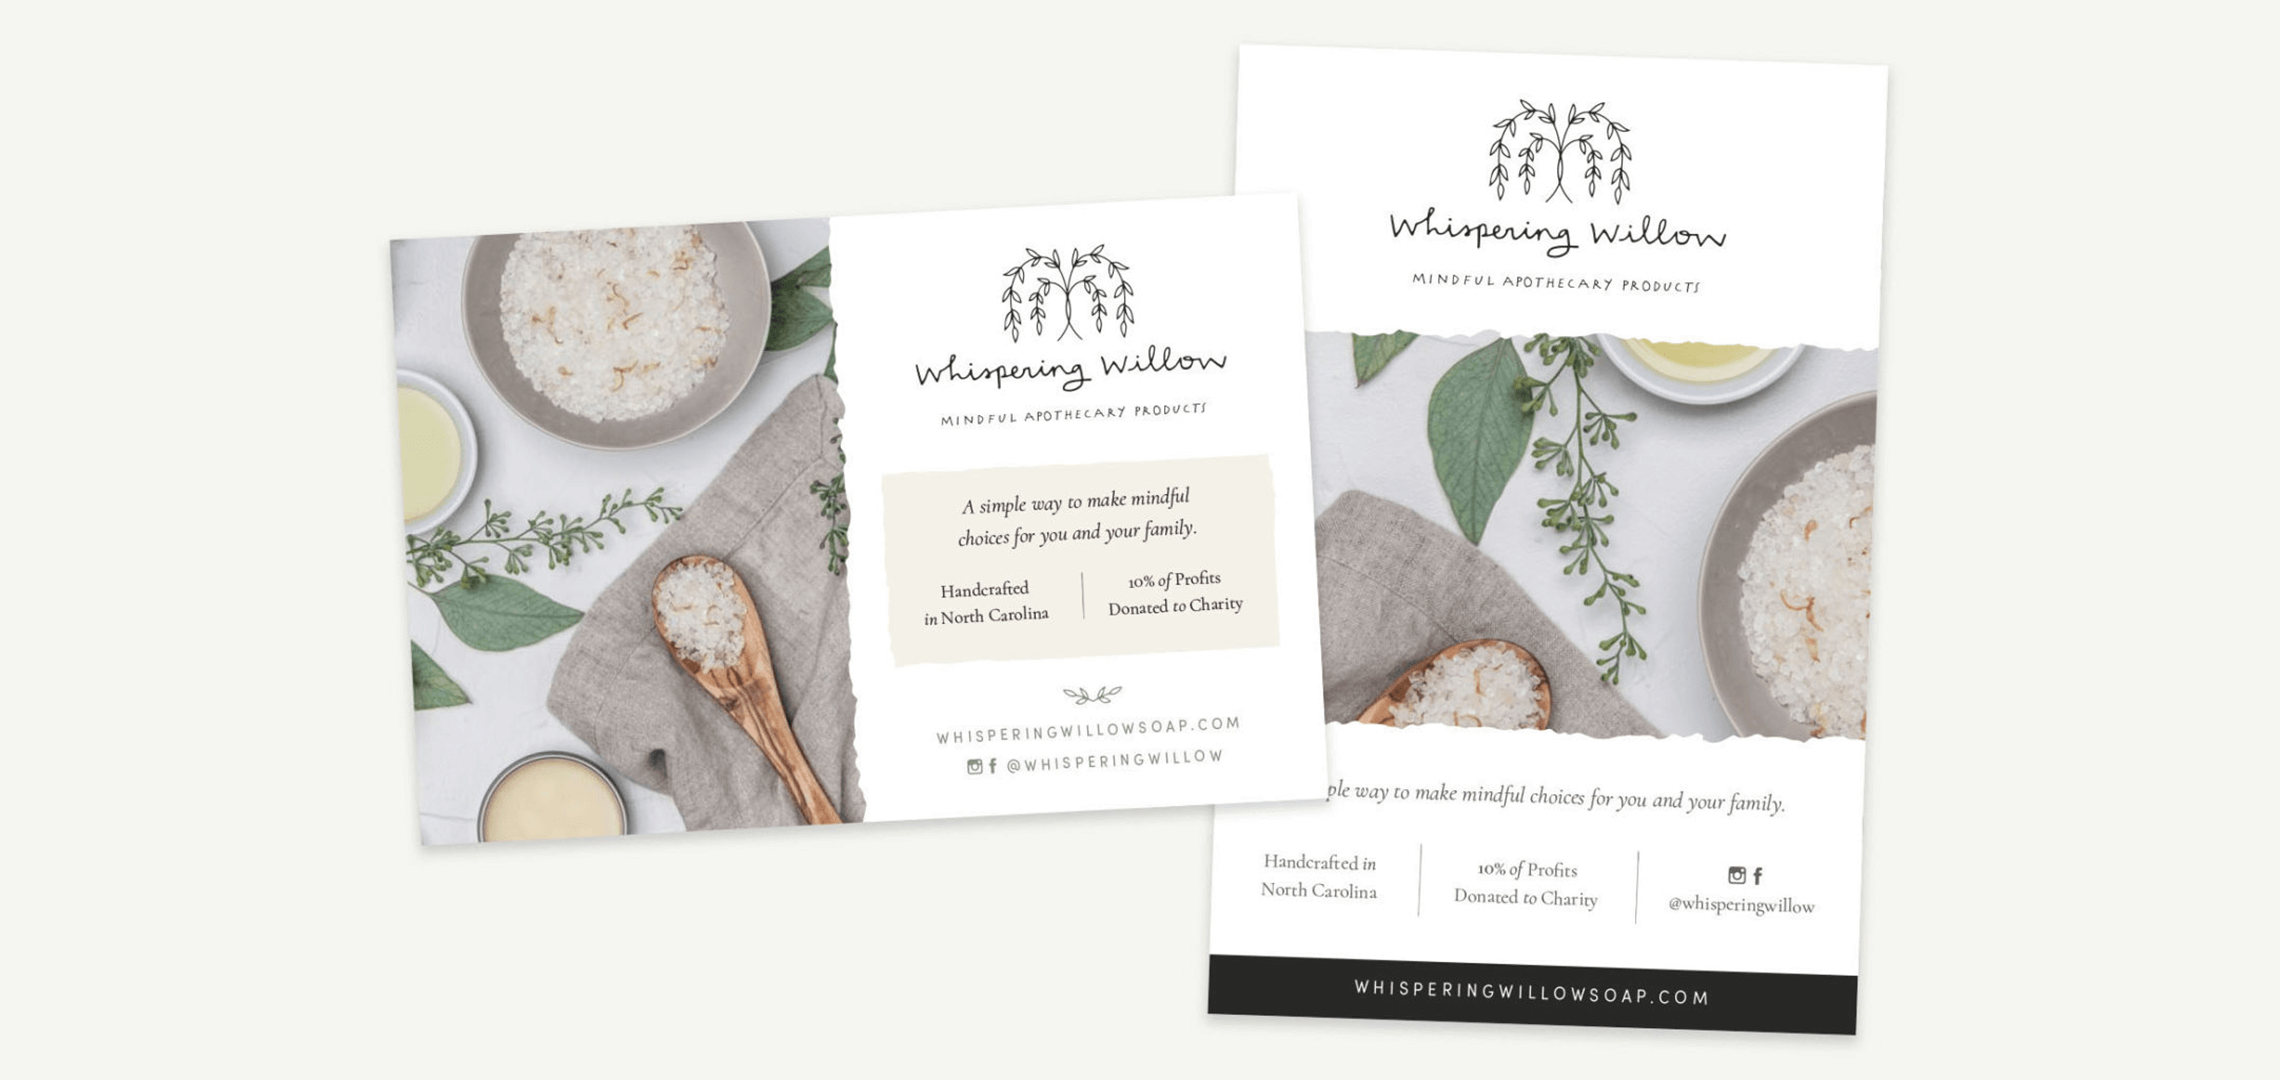 Whispering Willow - postcard design for a natural apothecary line.